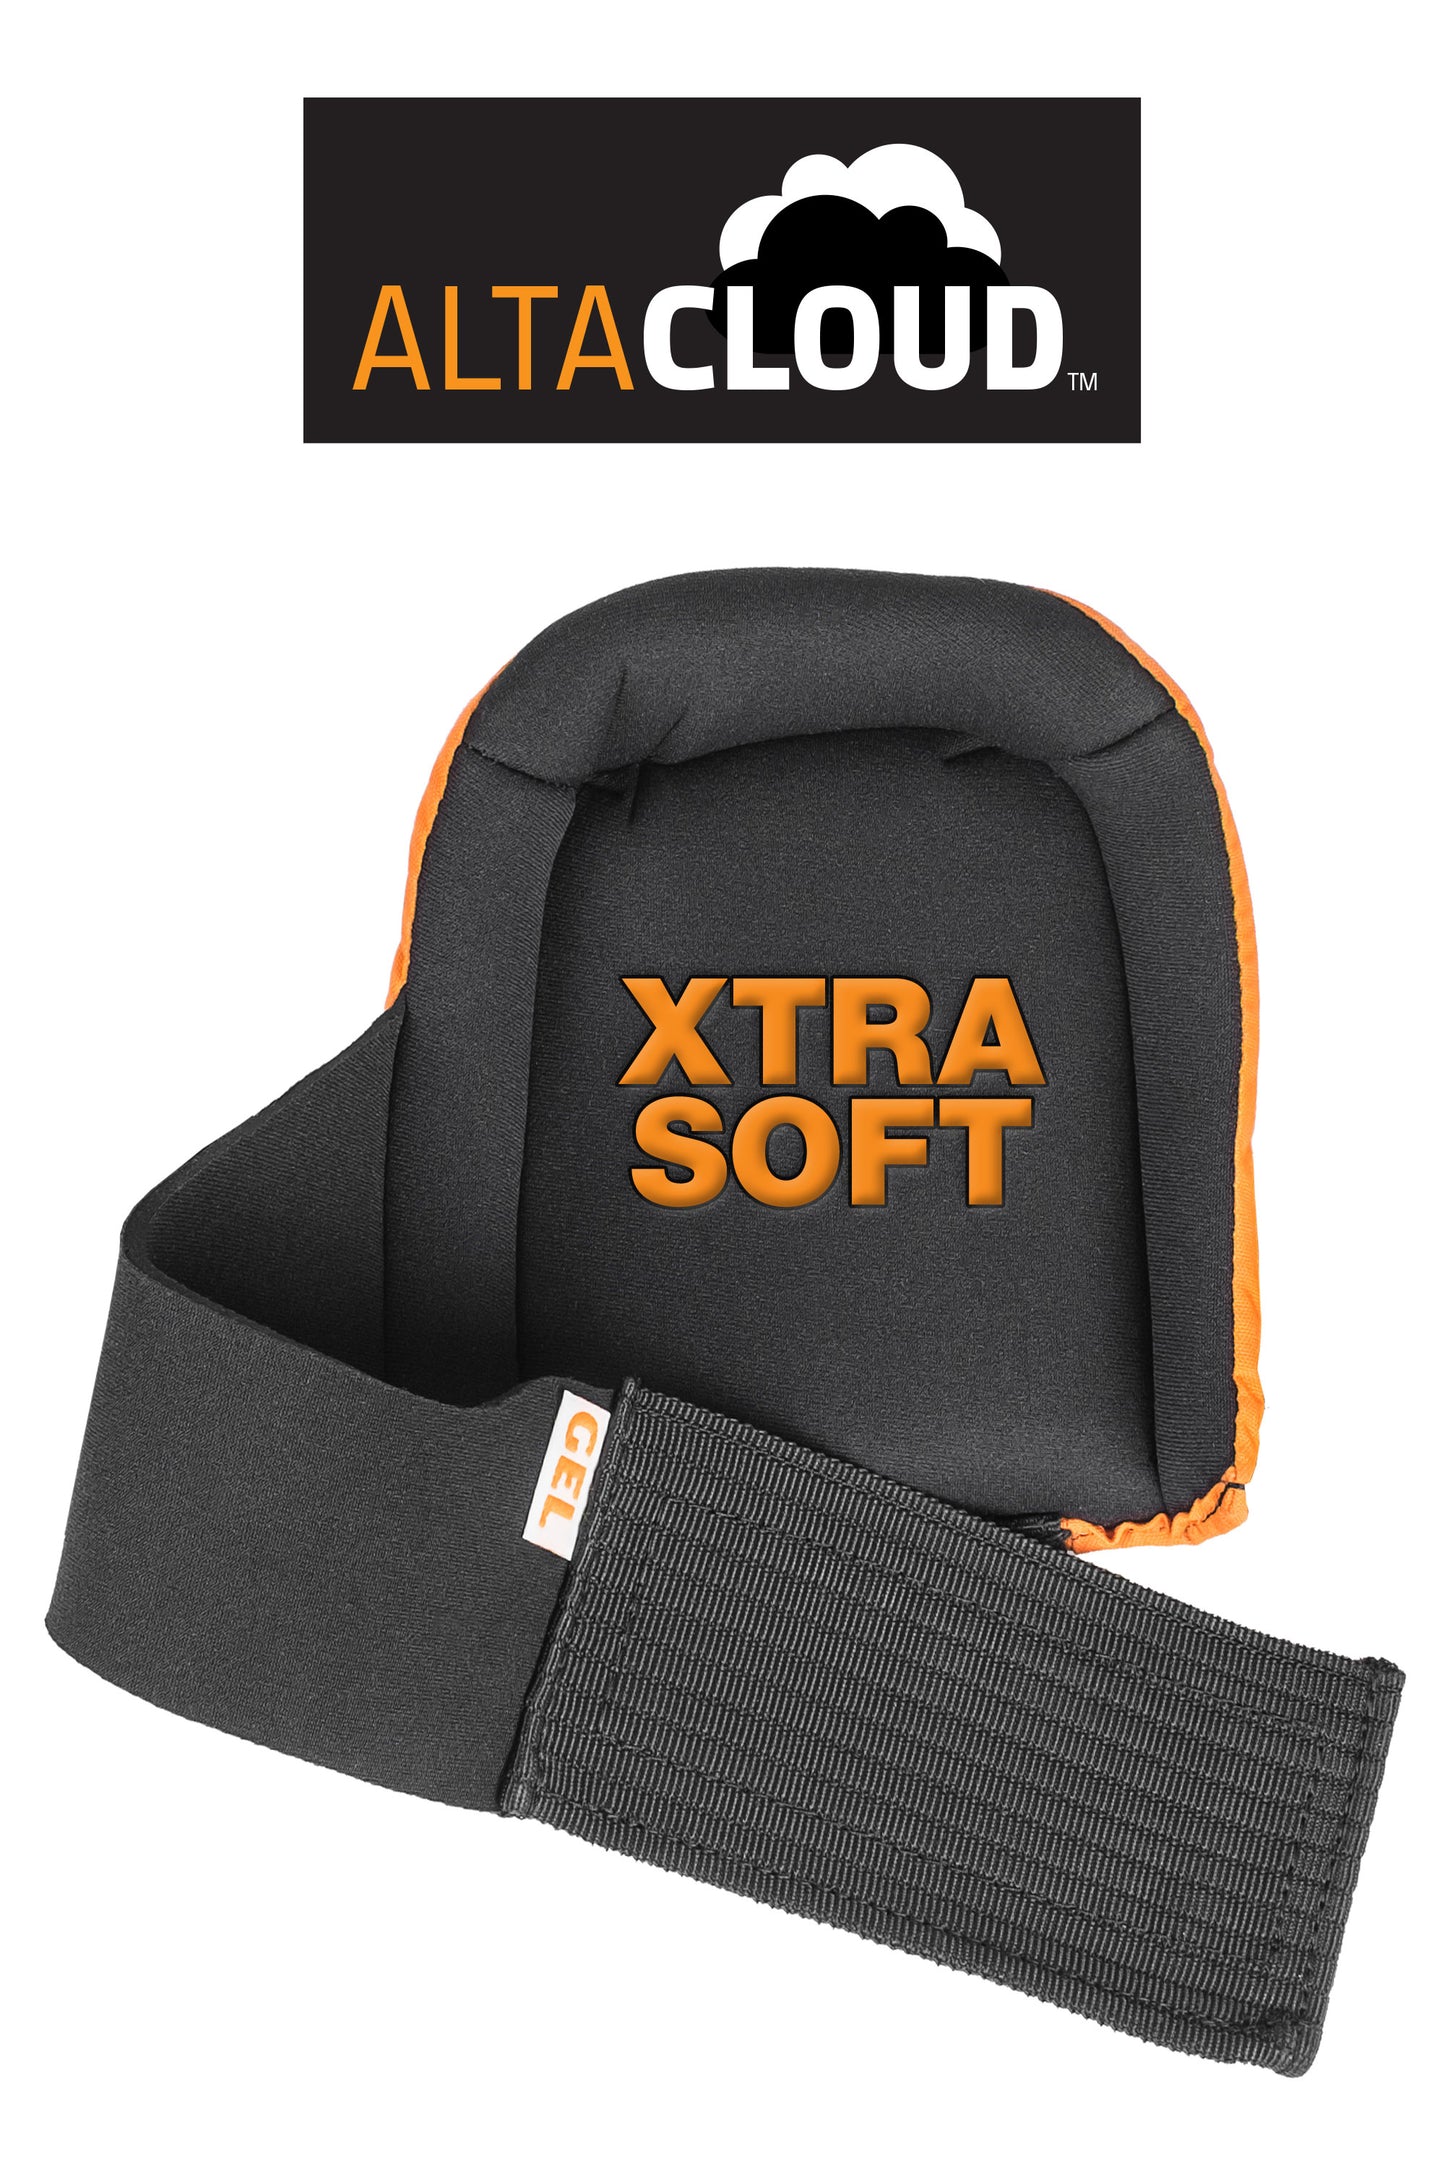 Alta CLOUD Extra Soft Knee Pad with one big neoprene strap